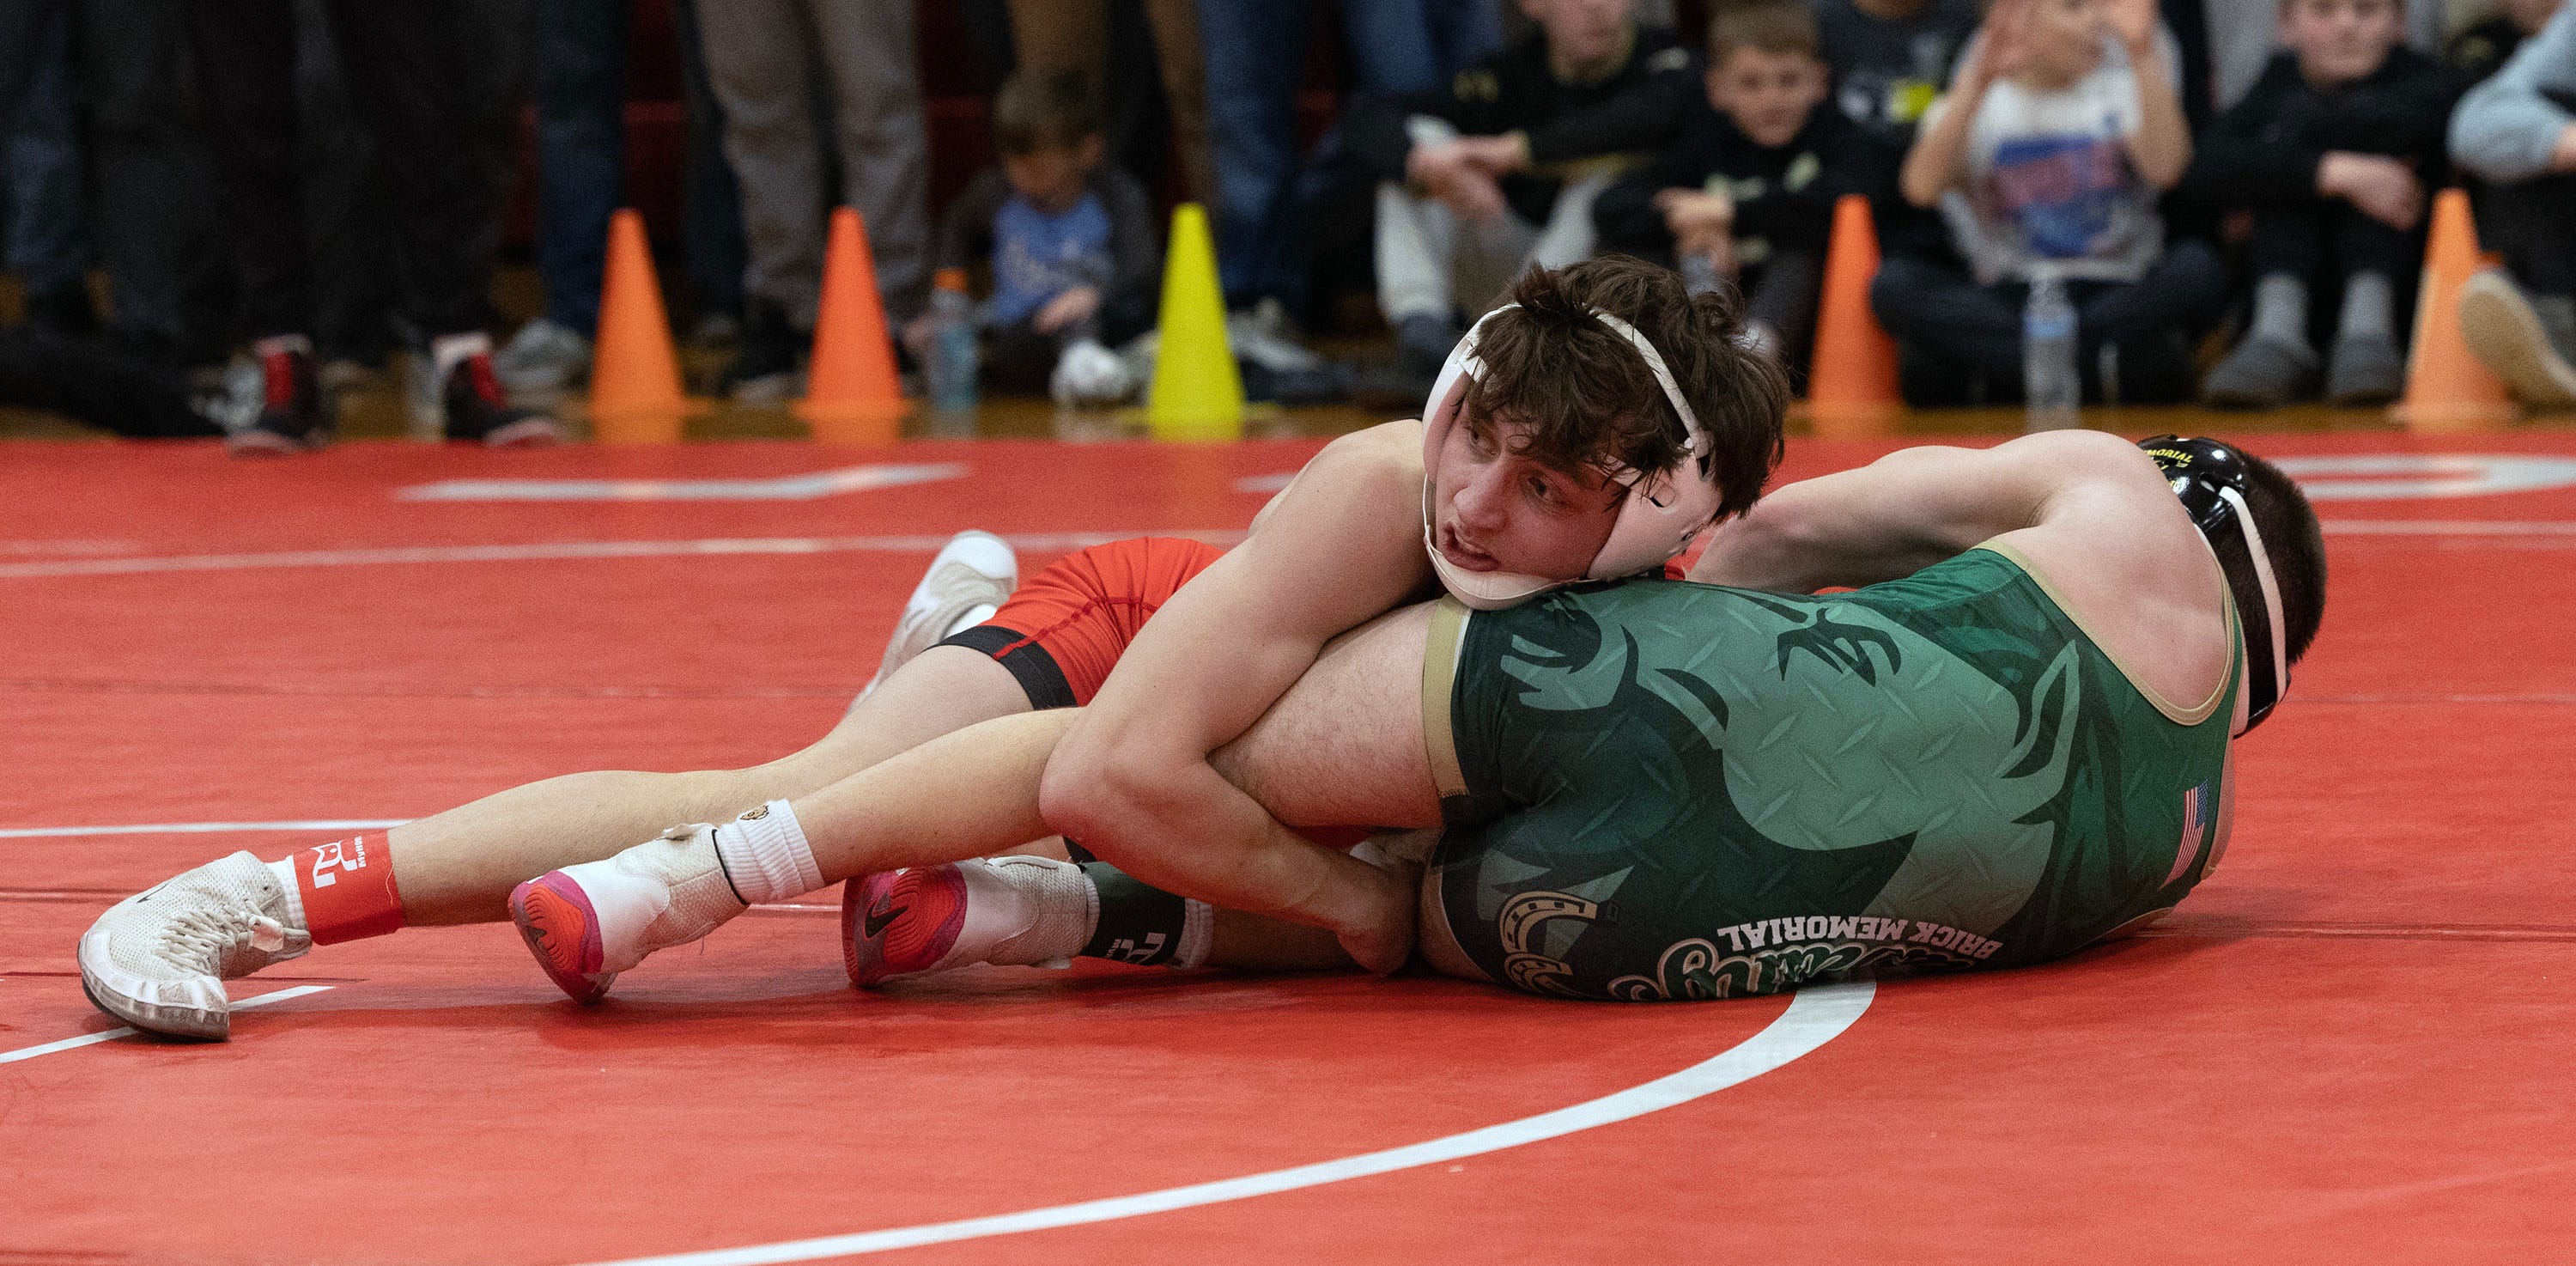 dom volek of ocean township records the biggest upset in the region 6 wrestling tournament